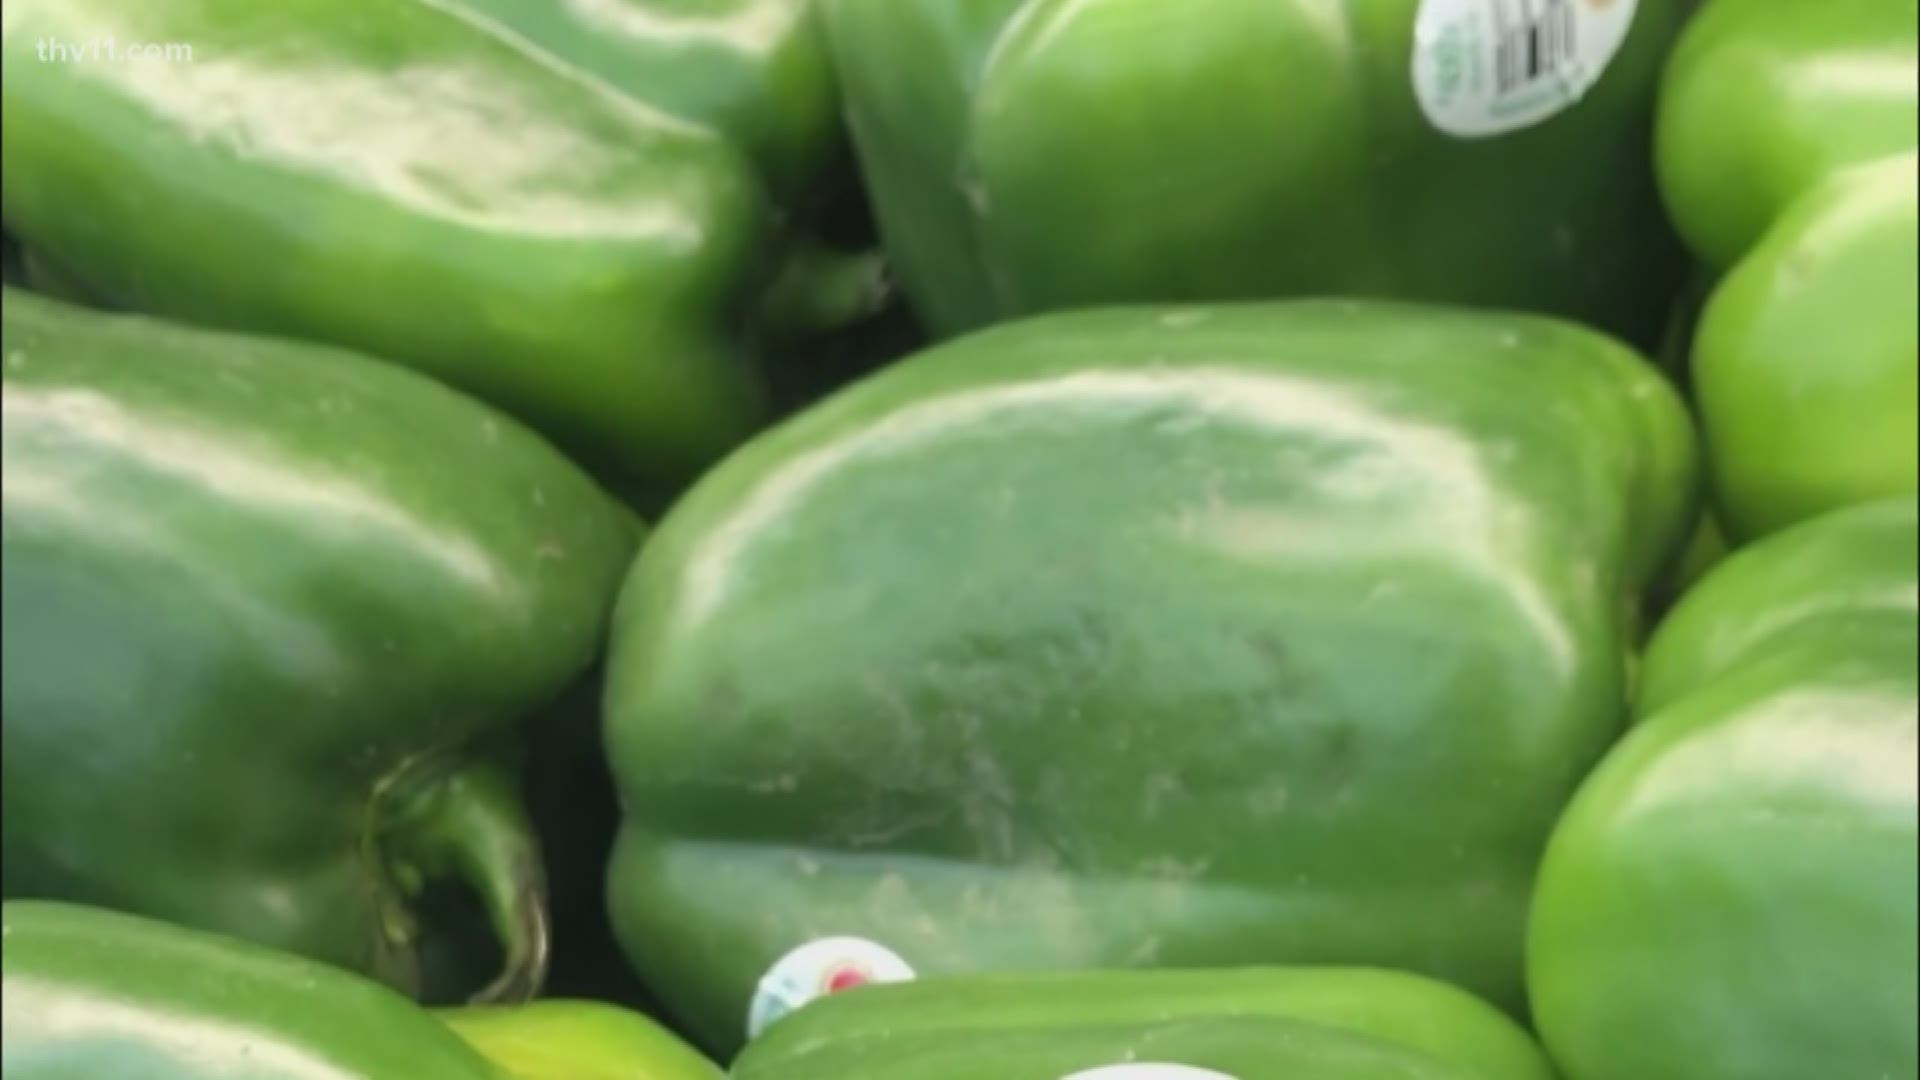 Do You Know the Real Difference Between Red and Green Peppers?